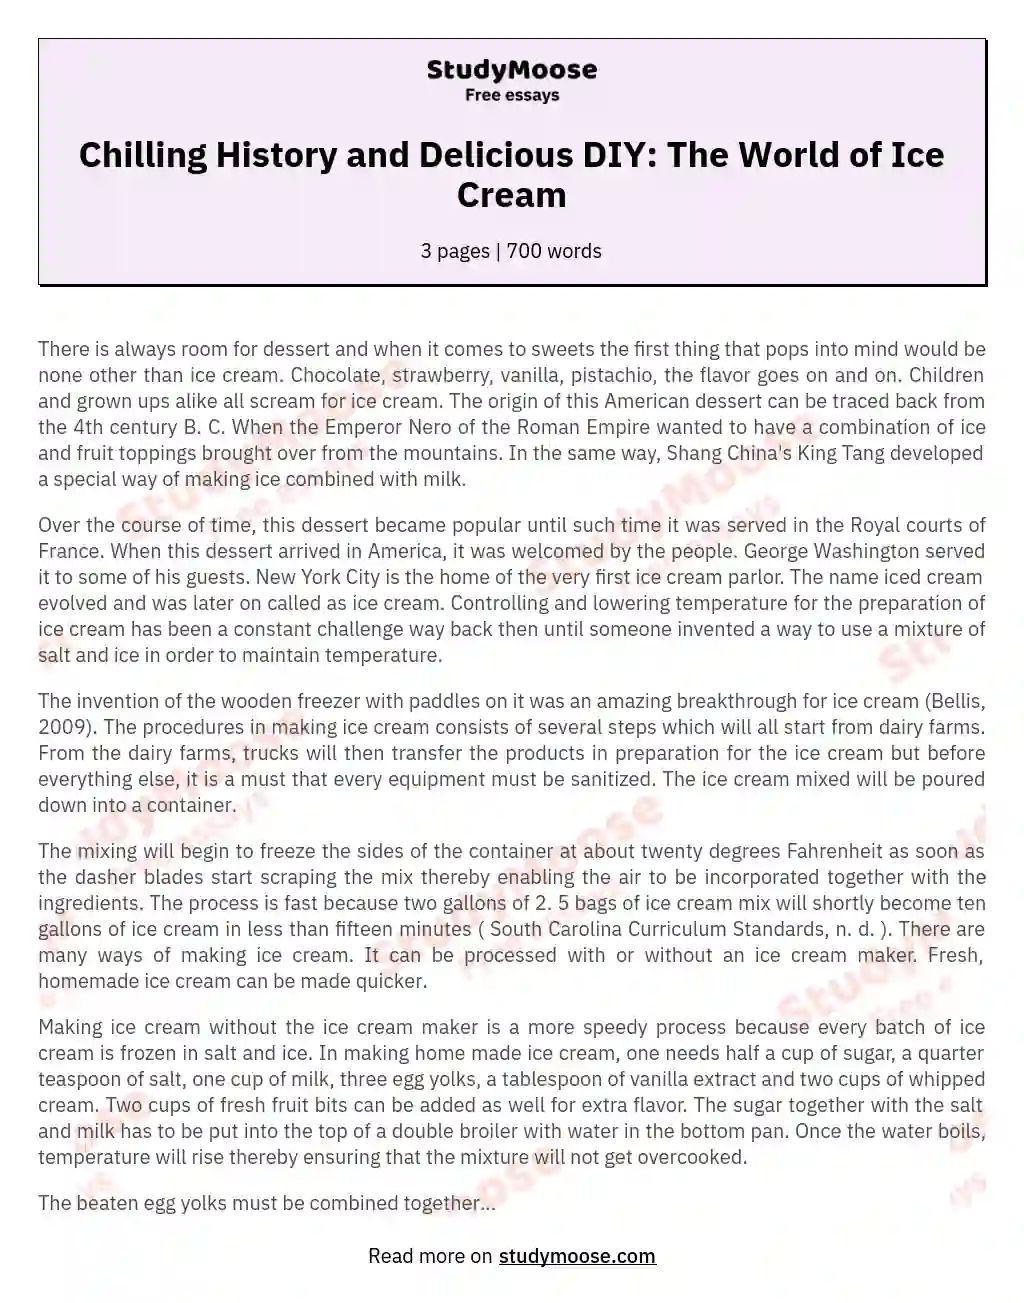 Chilling History and Delicious DIY: The World of Ice Cream essay